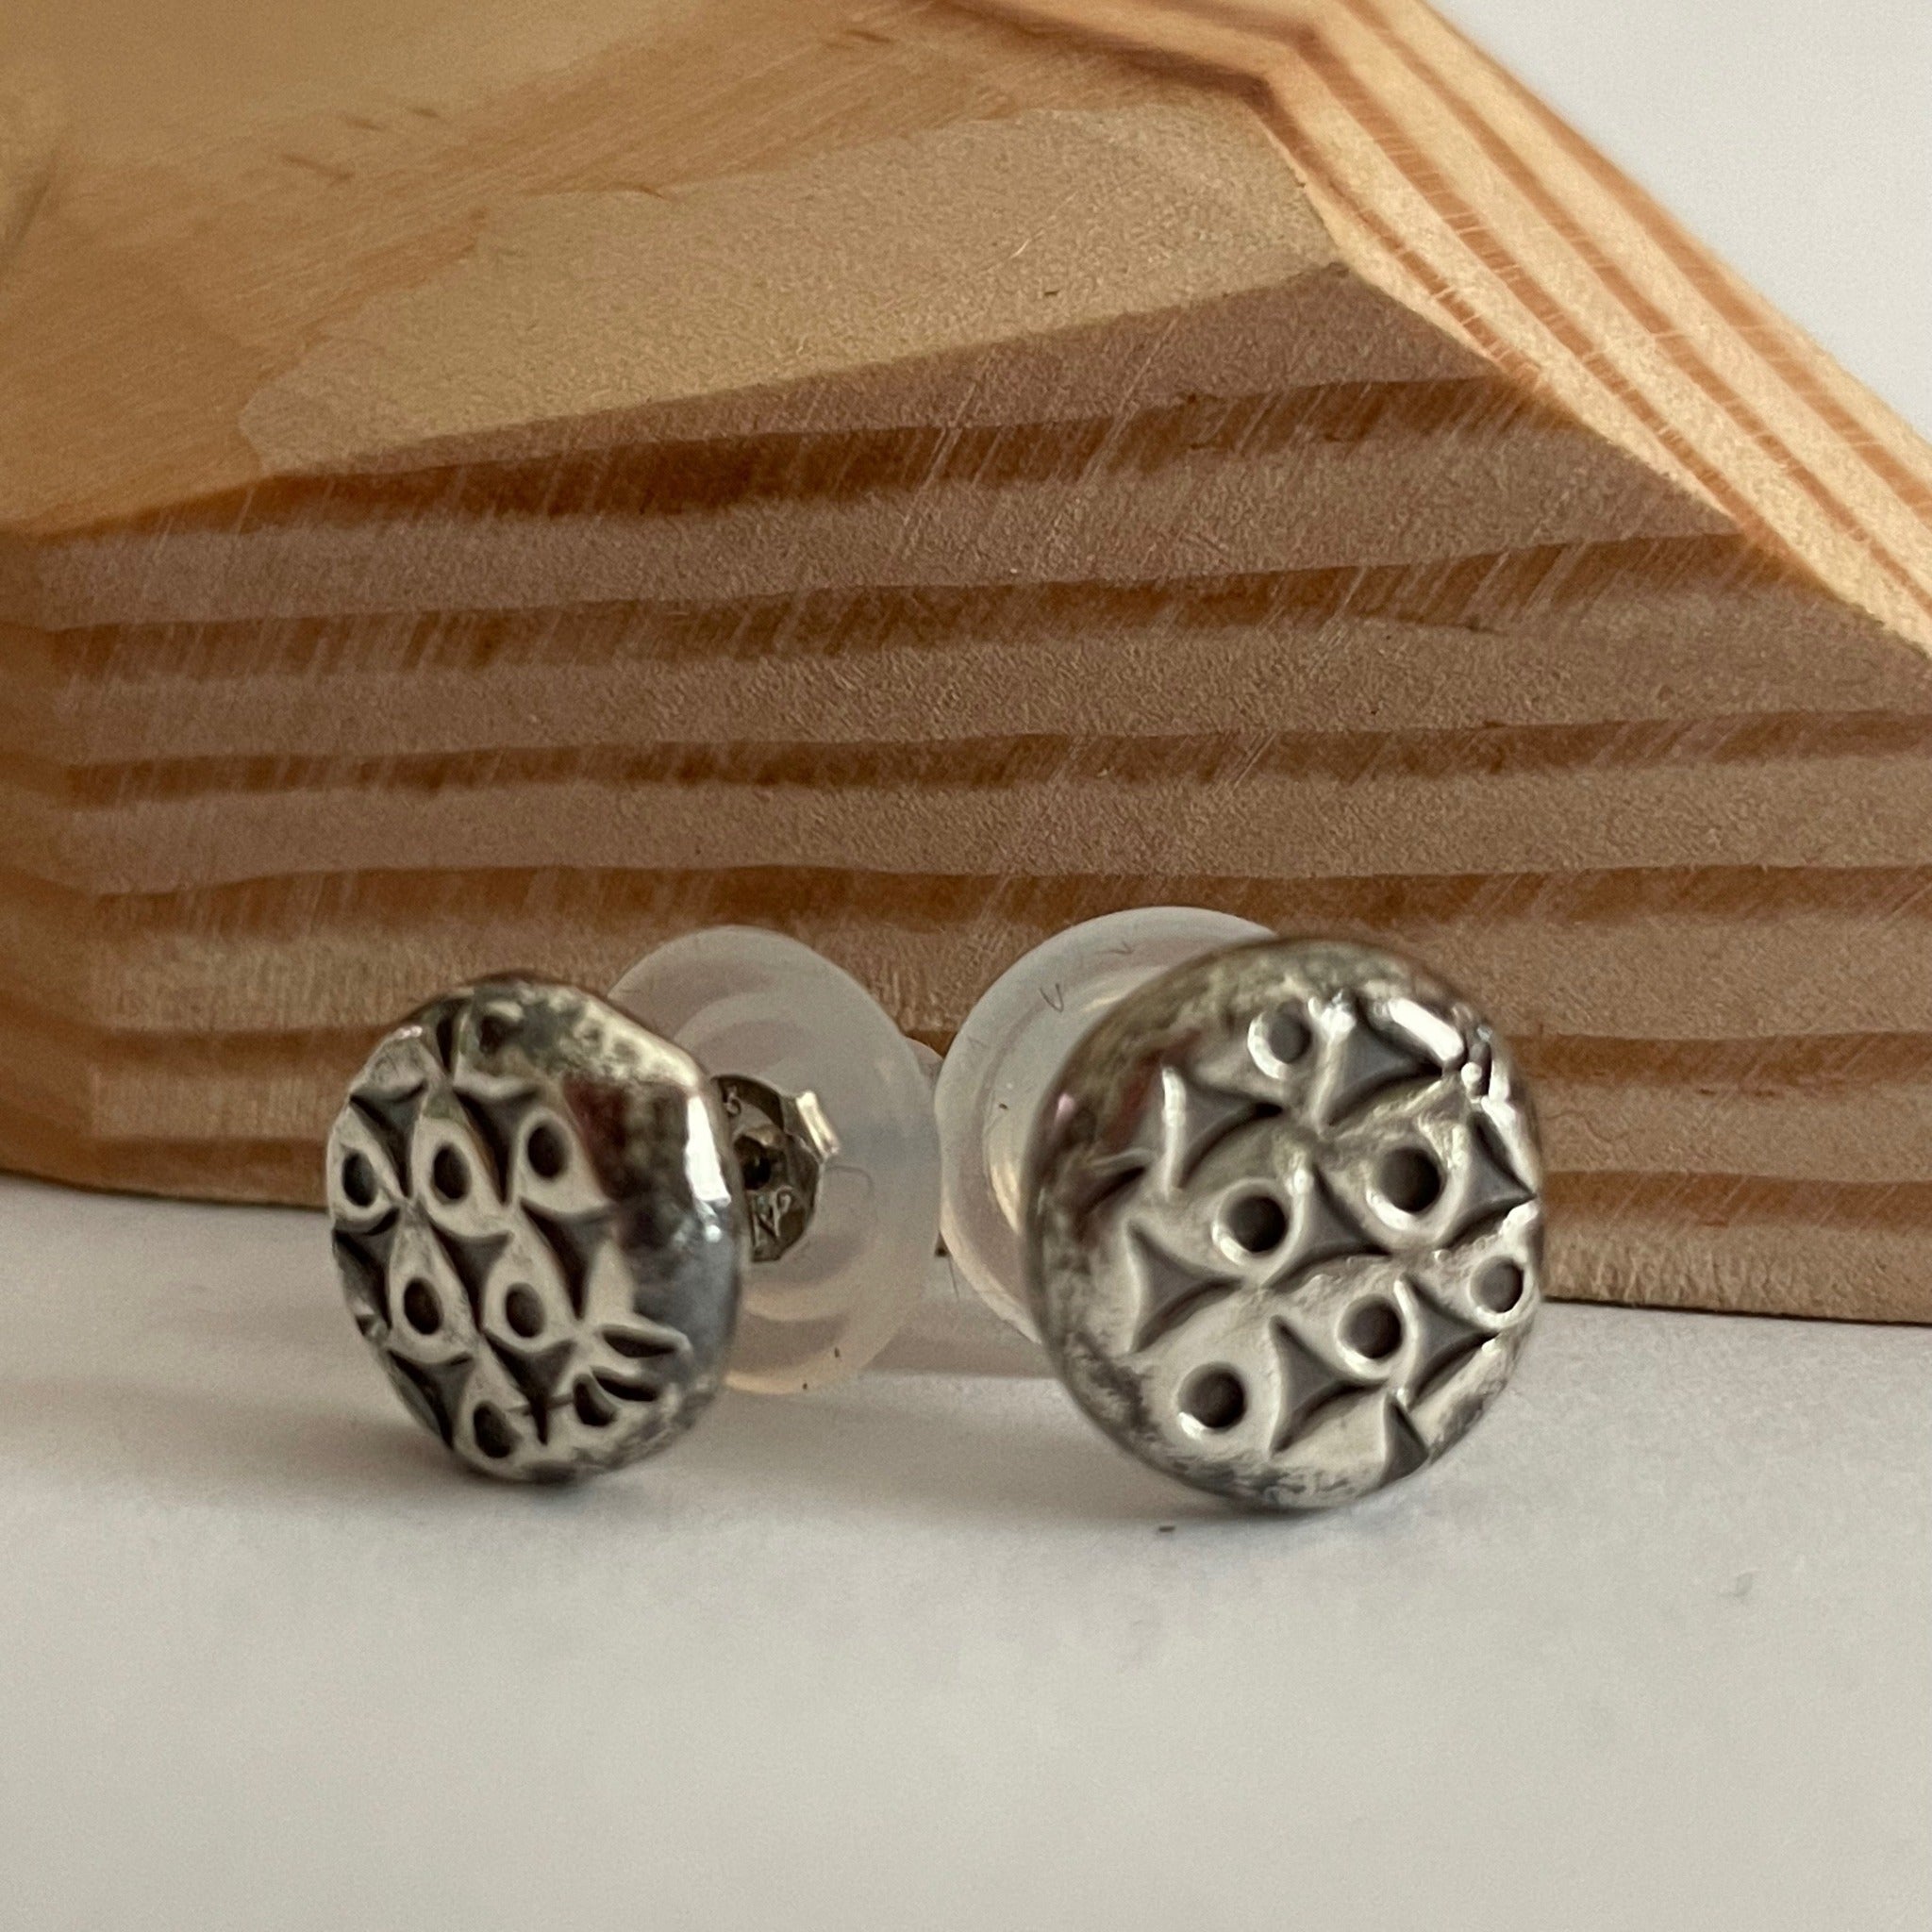 Modern melted silver, hand forged, stud earrings handmade by Pam de Groot